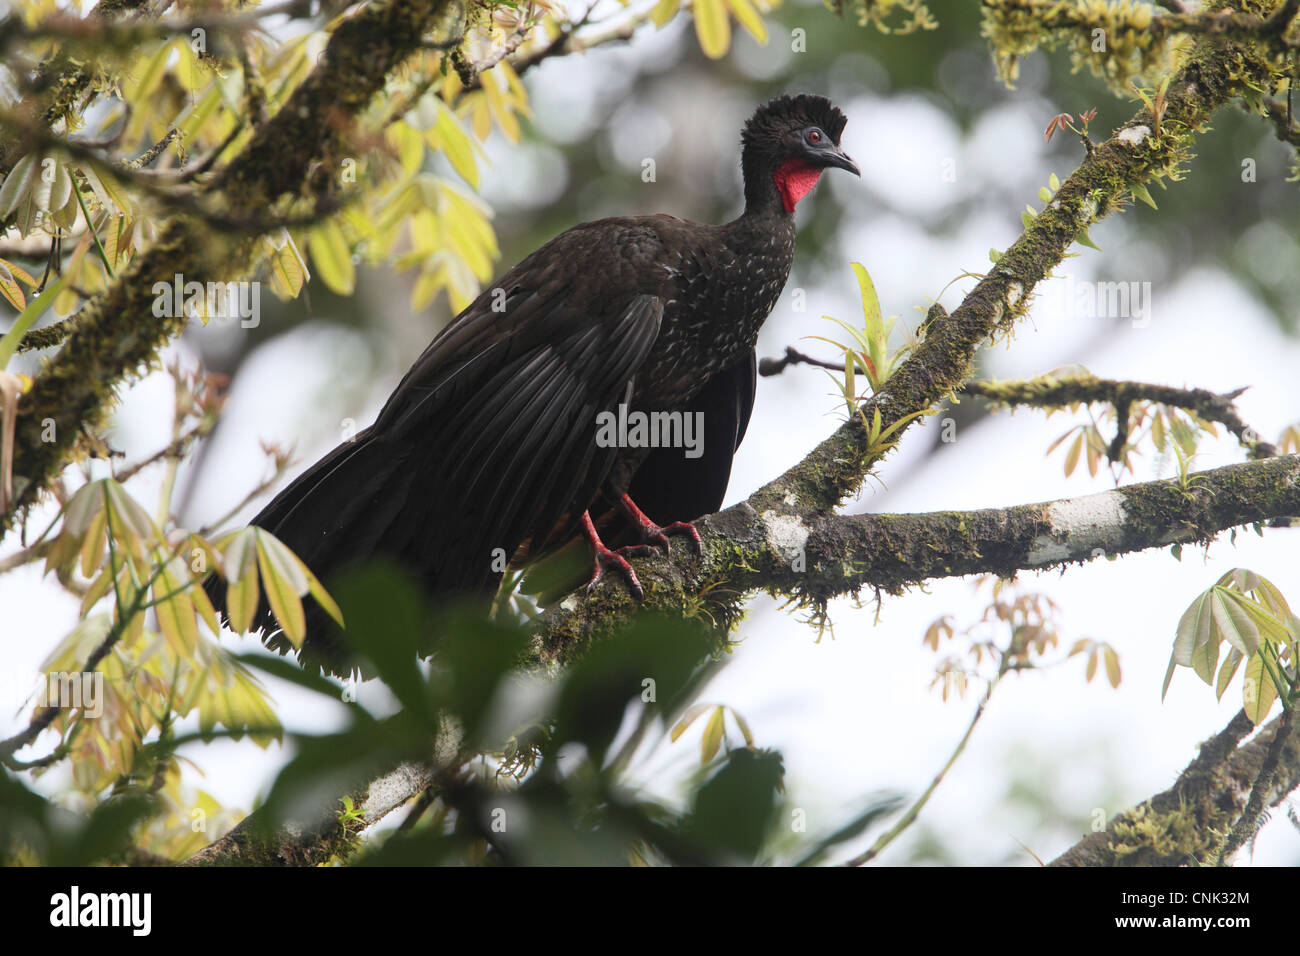 Crested Guan (Penelope purpurascens) adult, perched on branch high in tree, Costa Rica, february Stock Photo